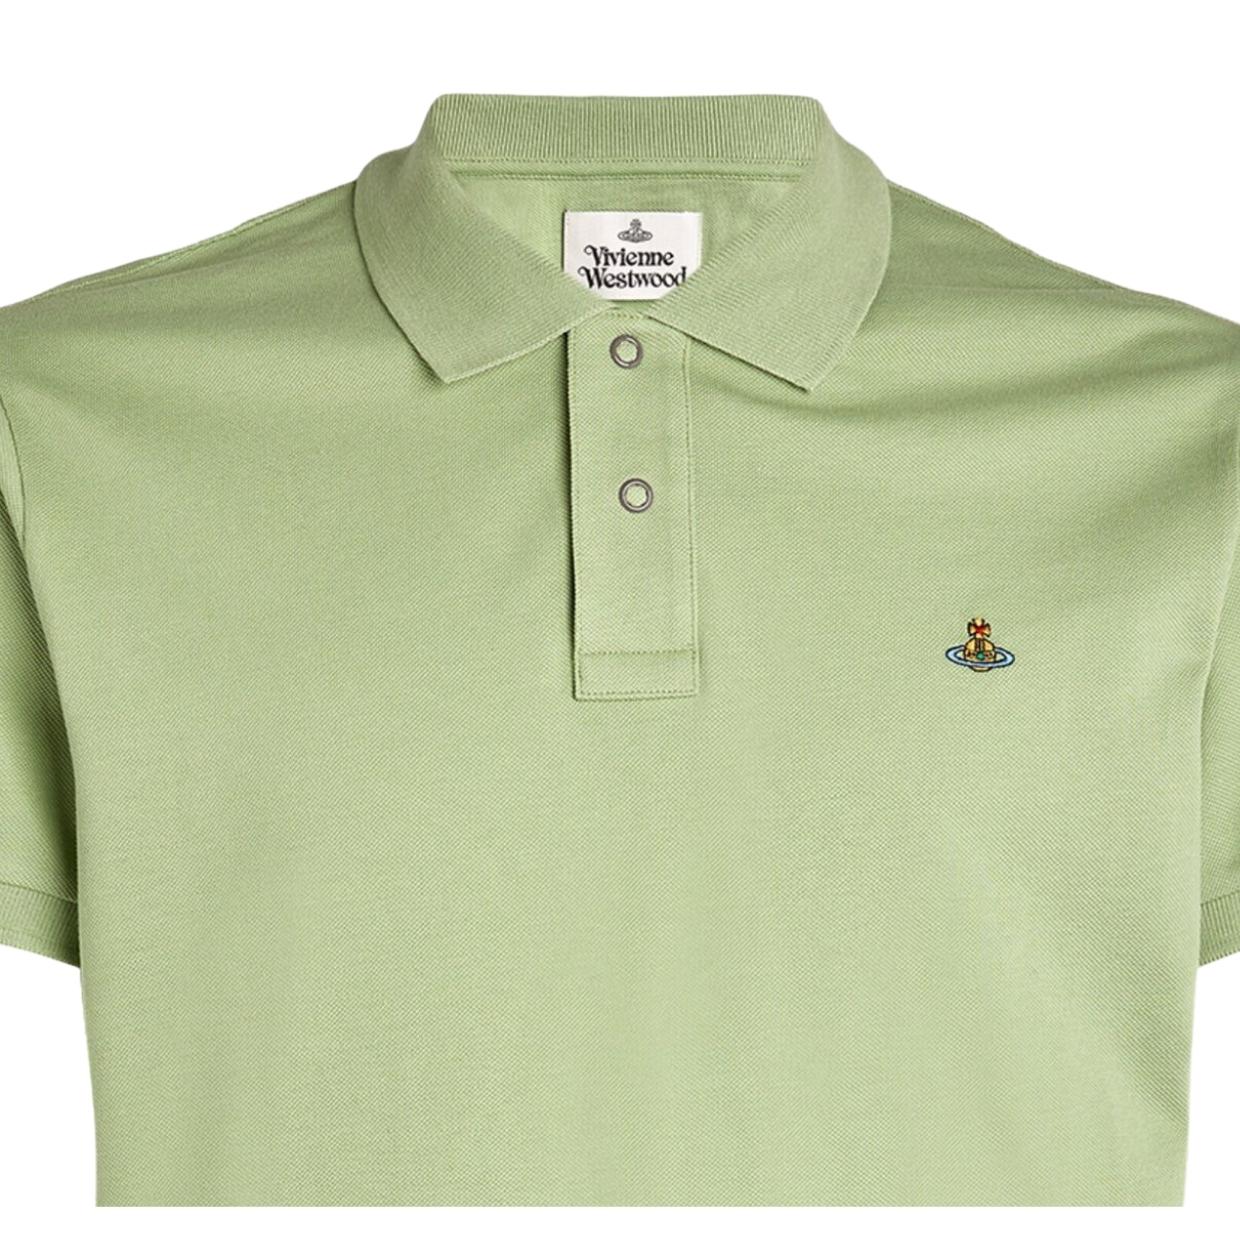 Vivienne Westwood Green Classic Polo Shirt